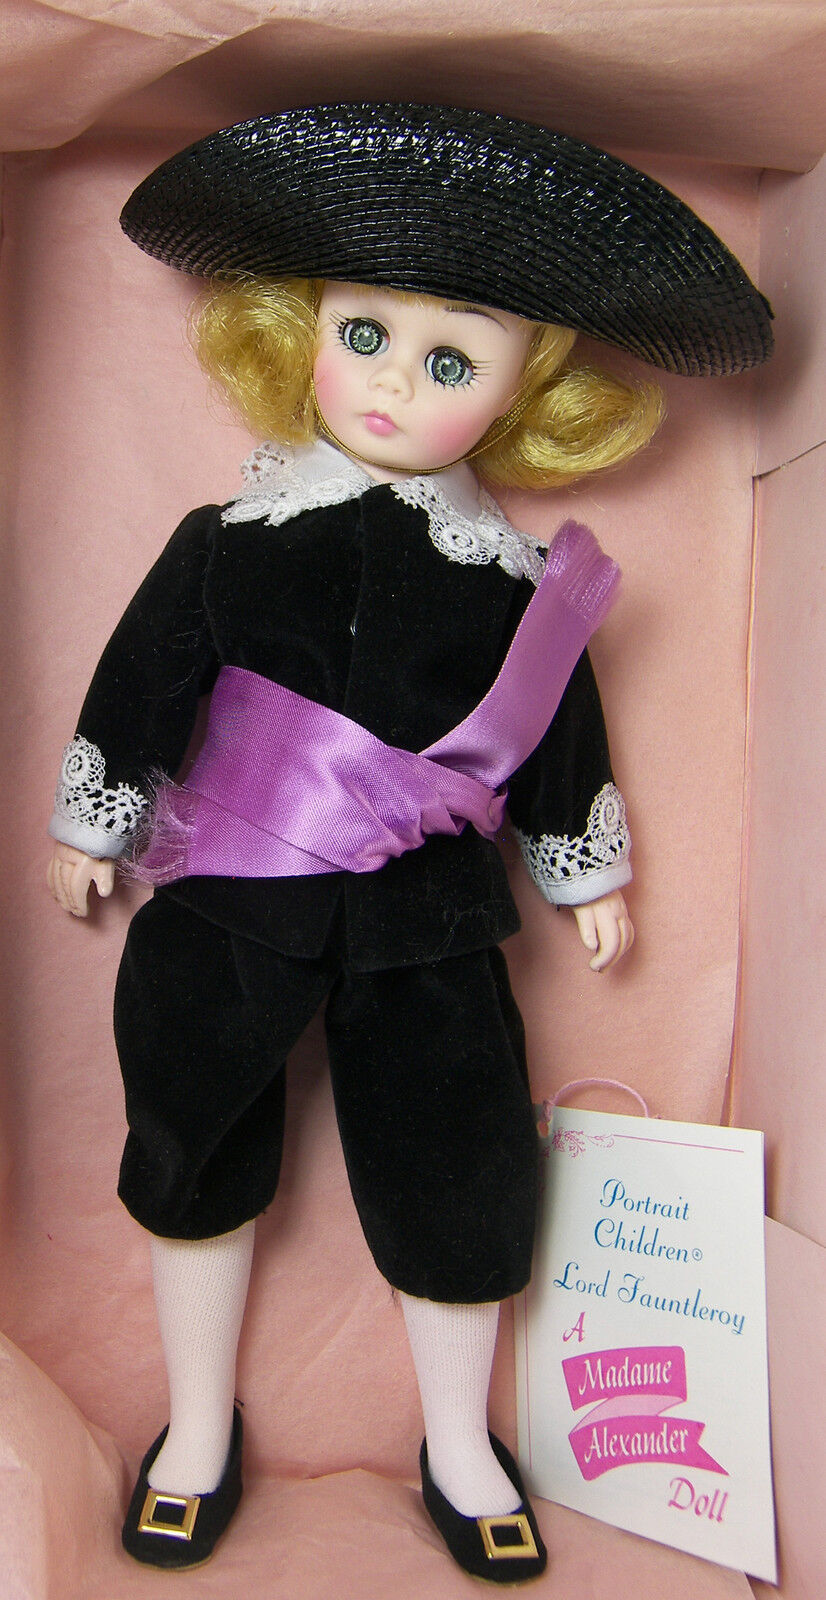 Primary image for Madame Alexander Lord Fauntleroy Doll 1390 Portrait Children in Box Tag 1981 12"